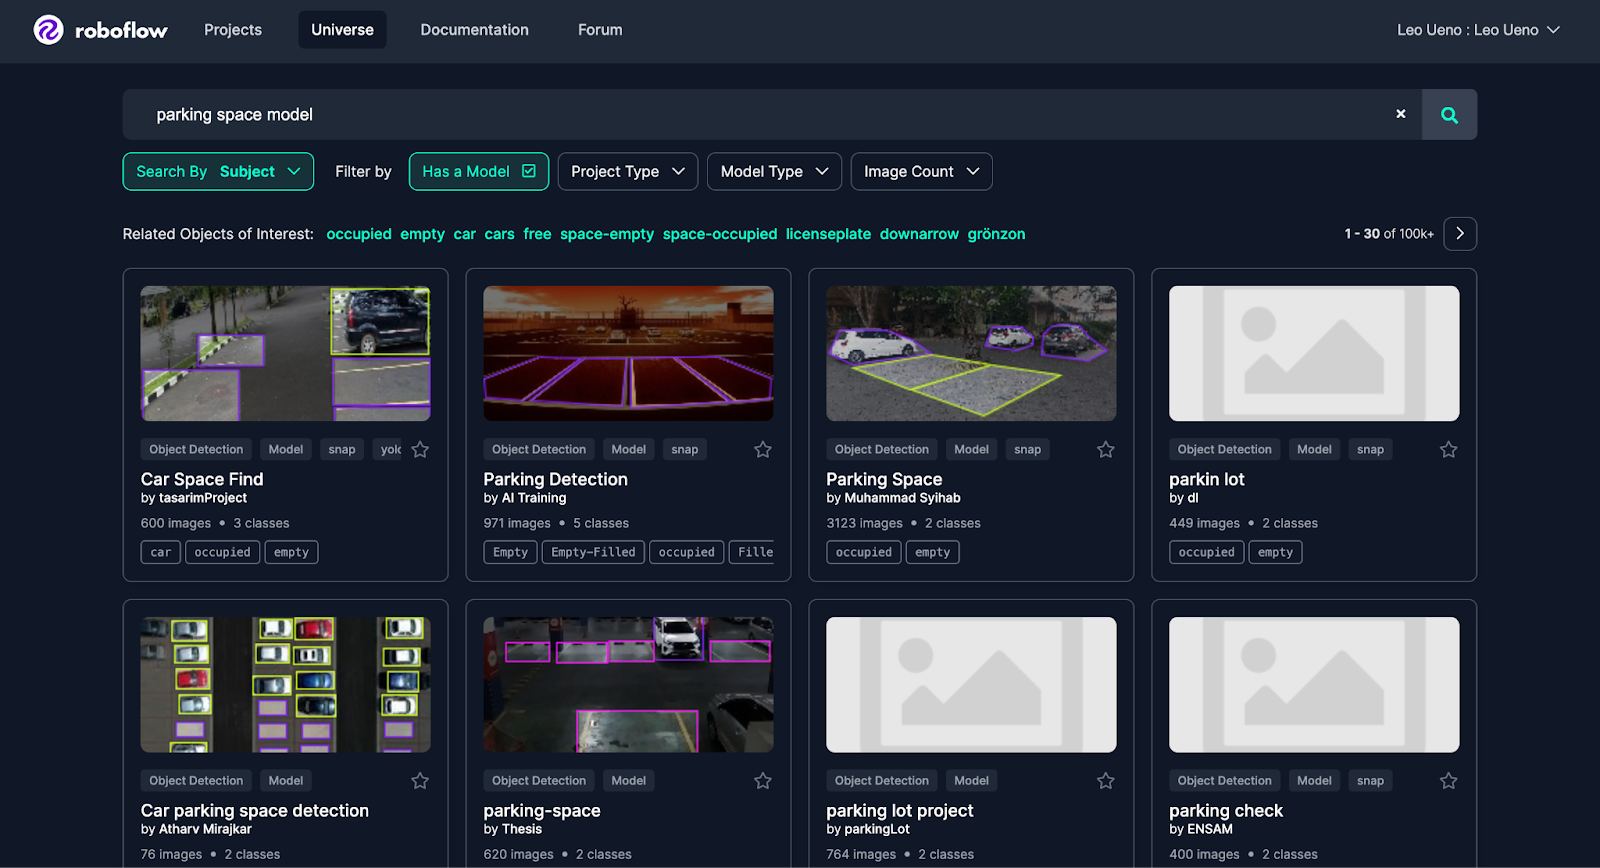 A screenshot of a search for a parking space detection model on Roboflow Universe